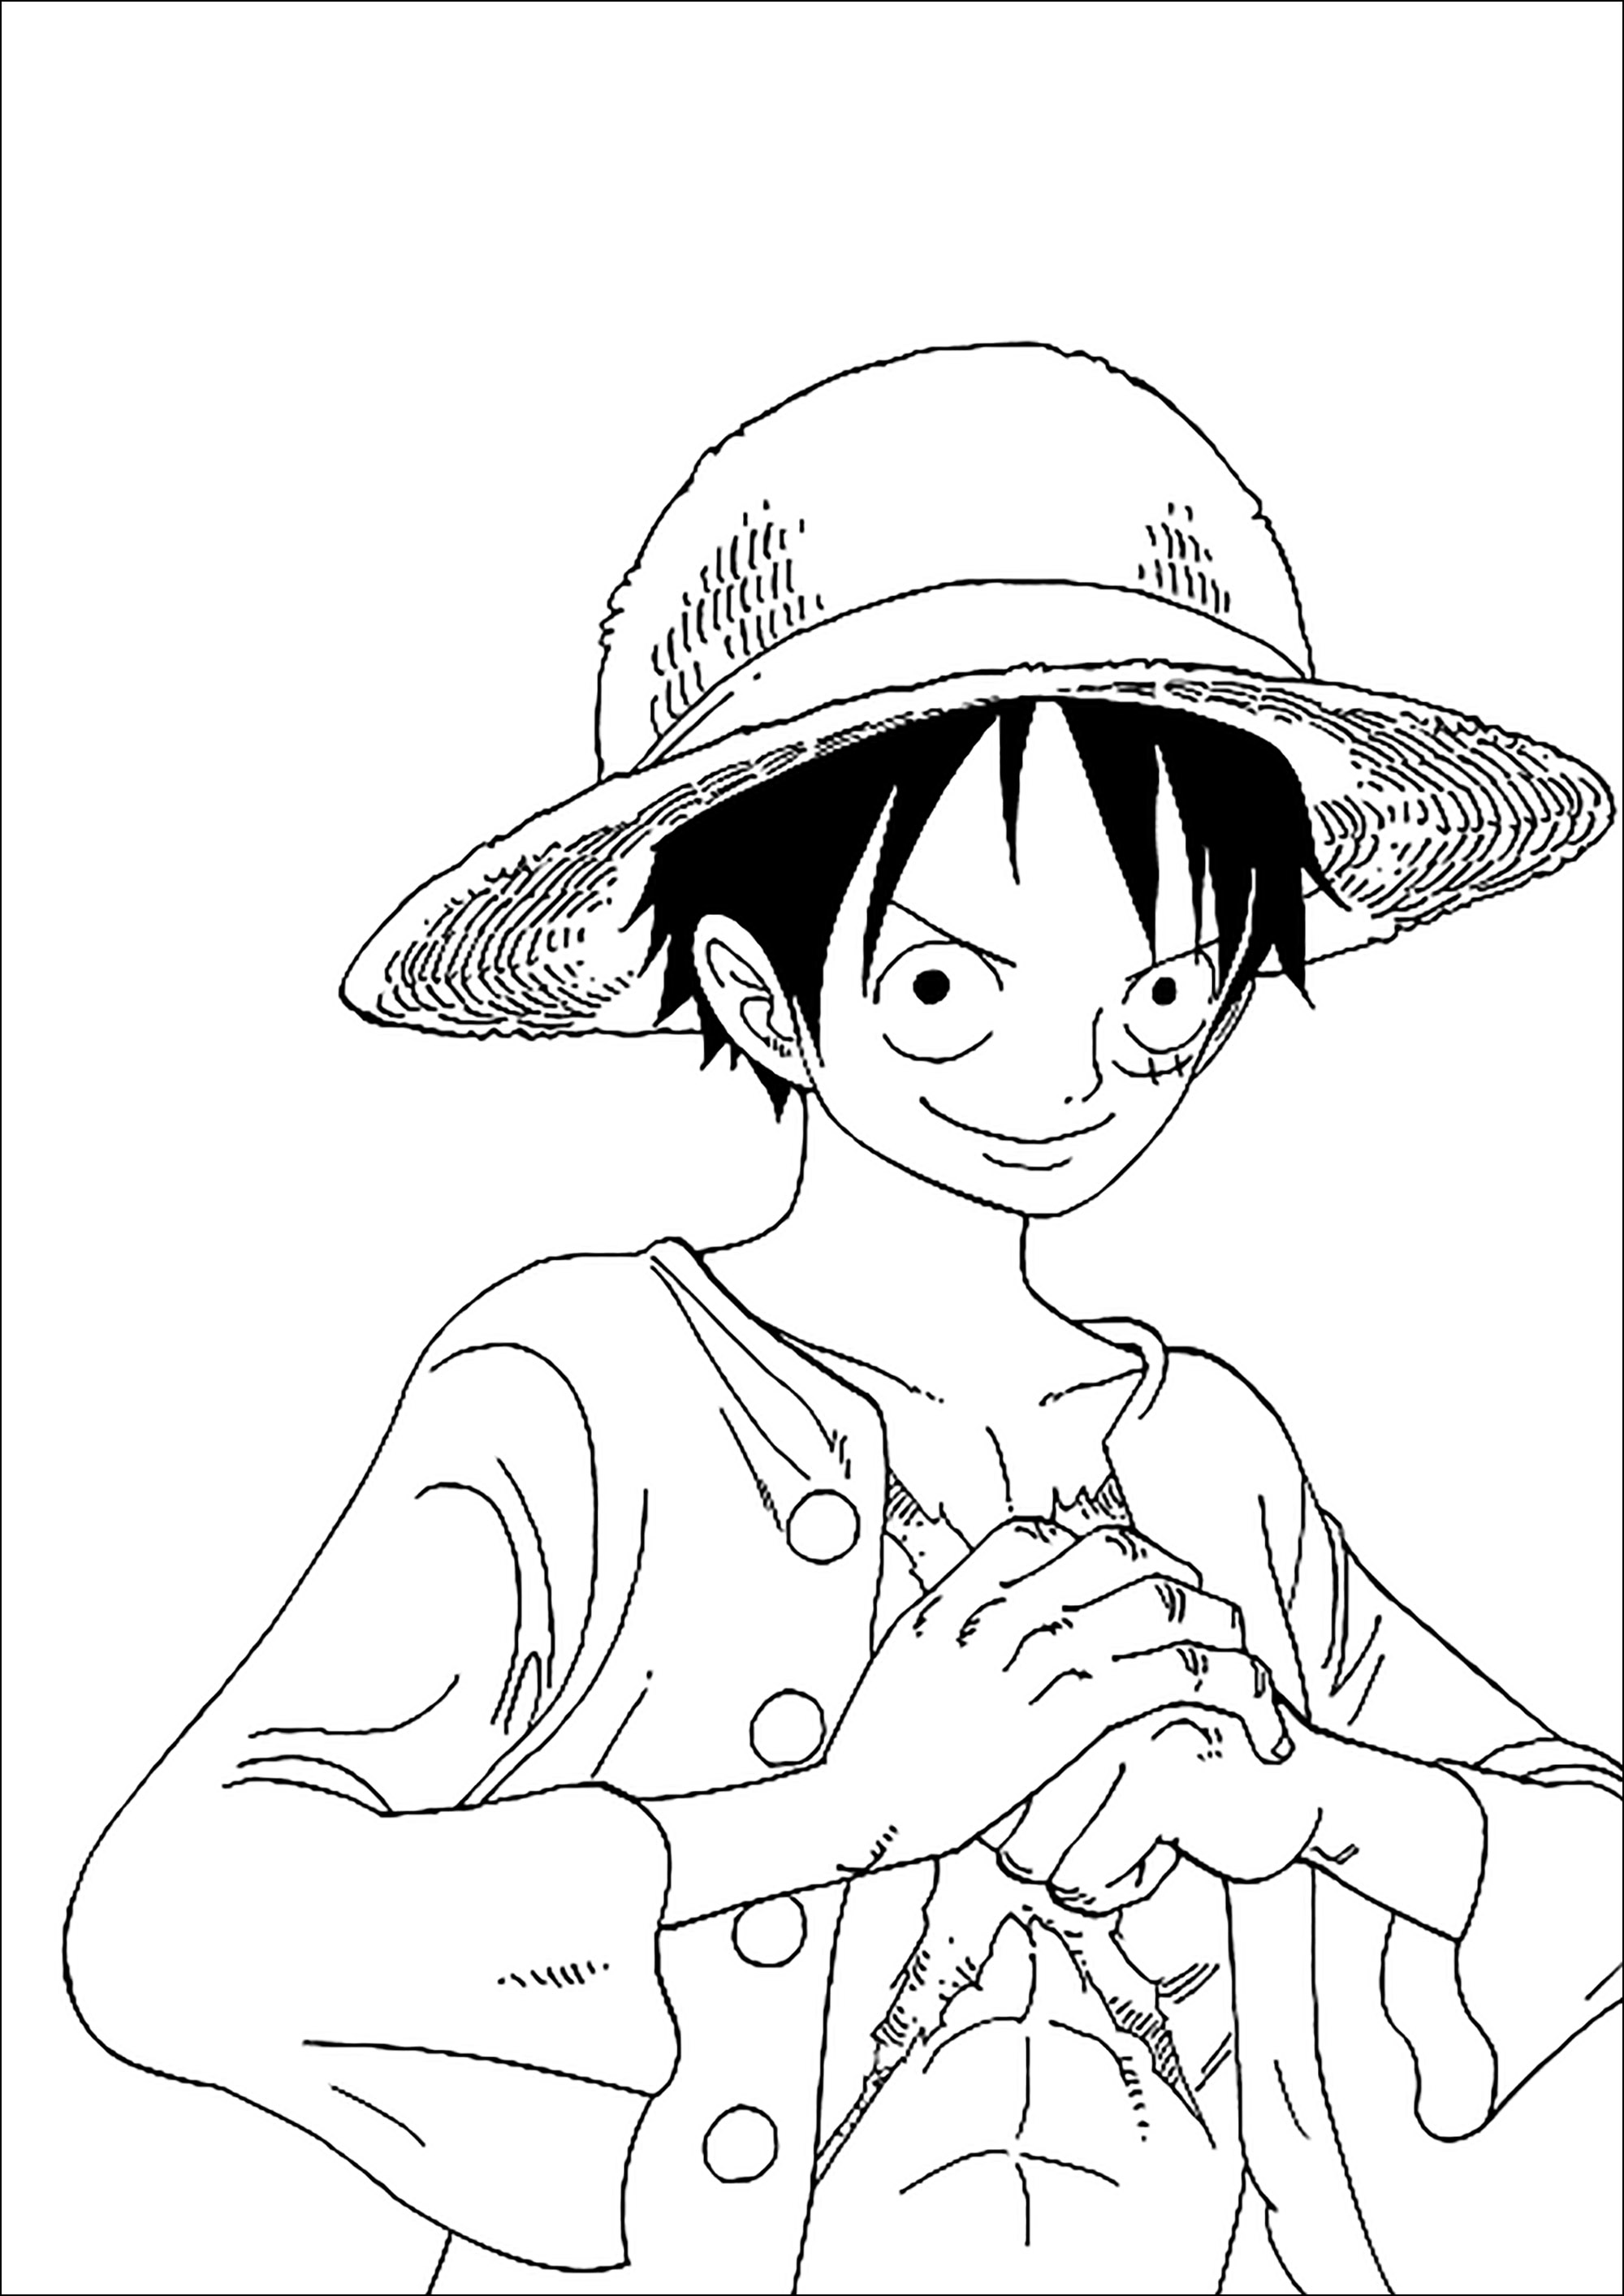 Monkey D. Luffy ready for battle - One Piece Kids Coloring Pages